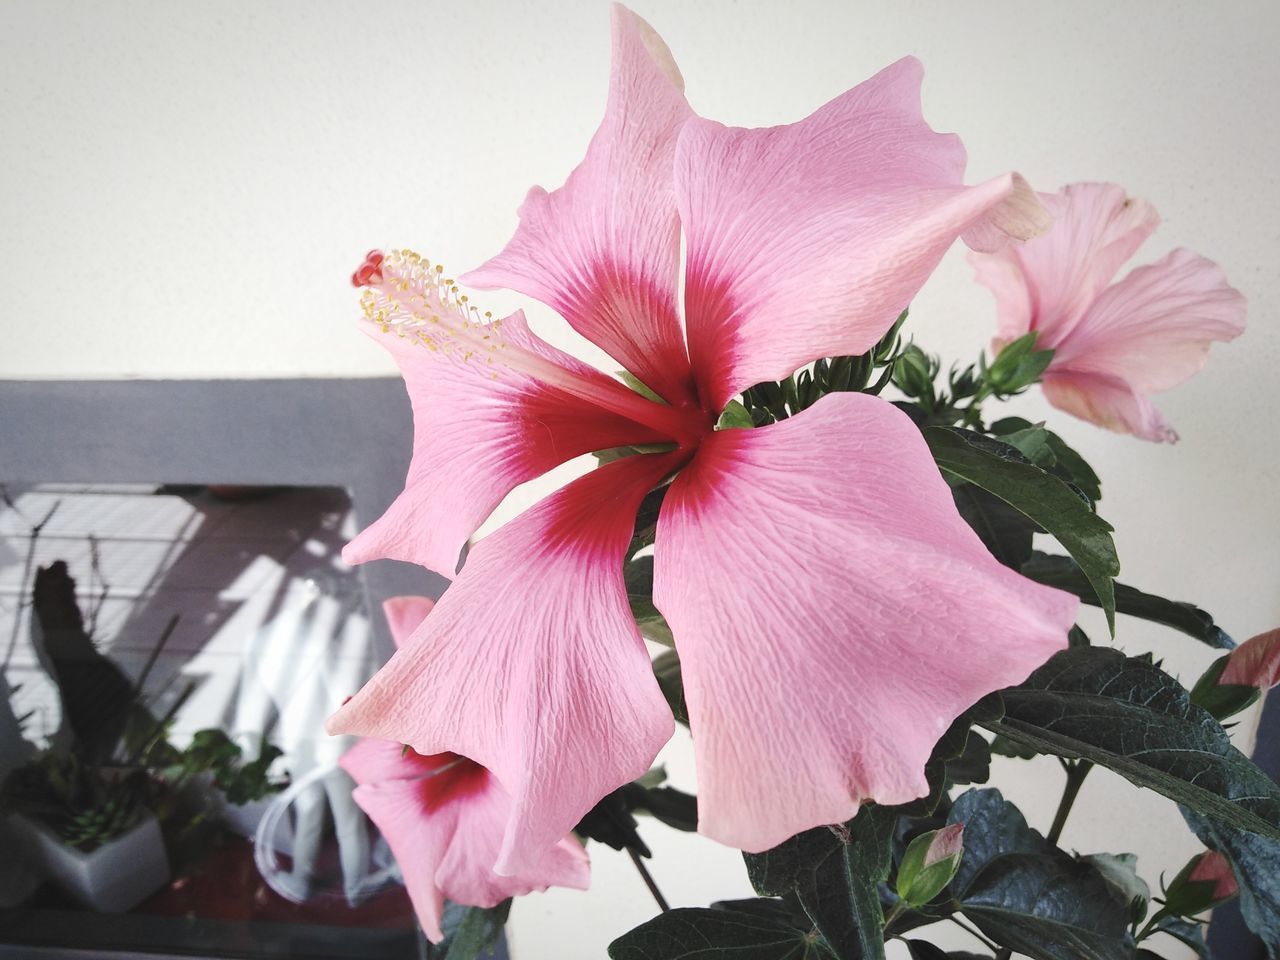 CLOSE-UP OF PINK HIBISCUS FLOWER WITH PLANT